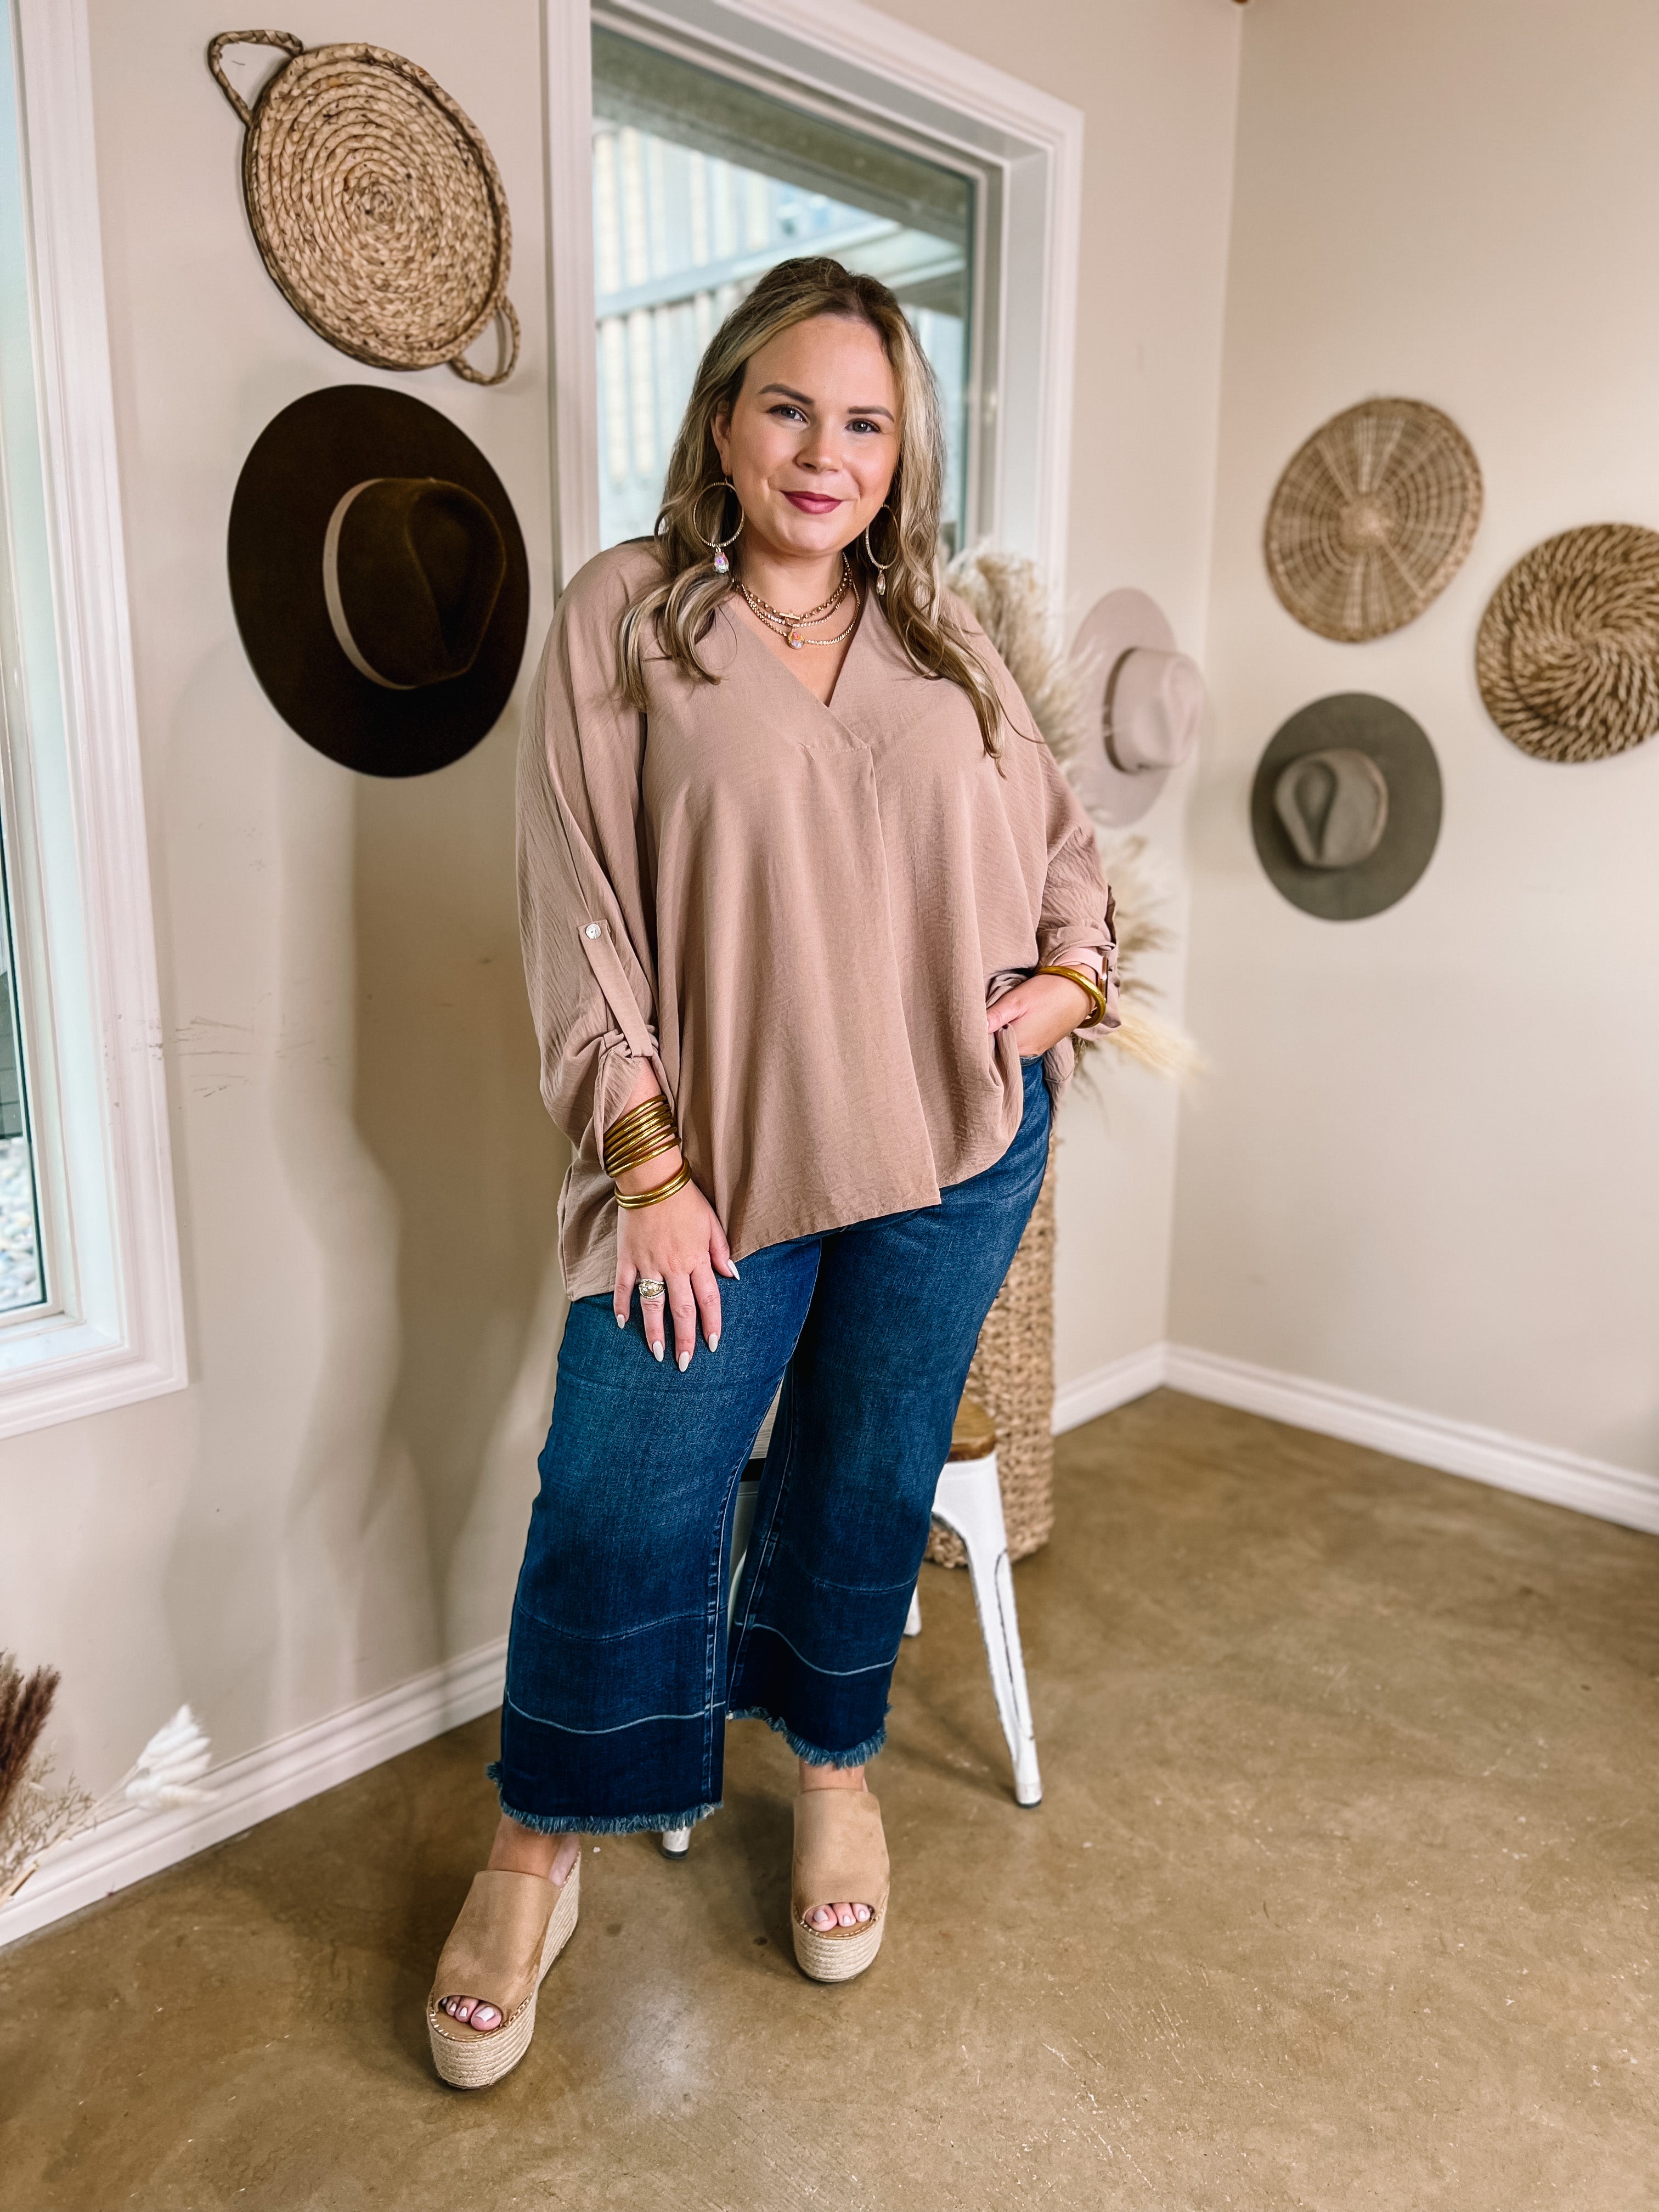 Weekend Out V Neck Placket 3/4 Sleeve Top in Taupe - Giddy Up Glamour Boutique